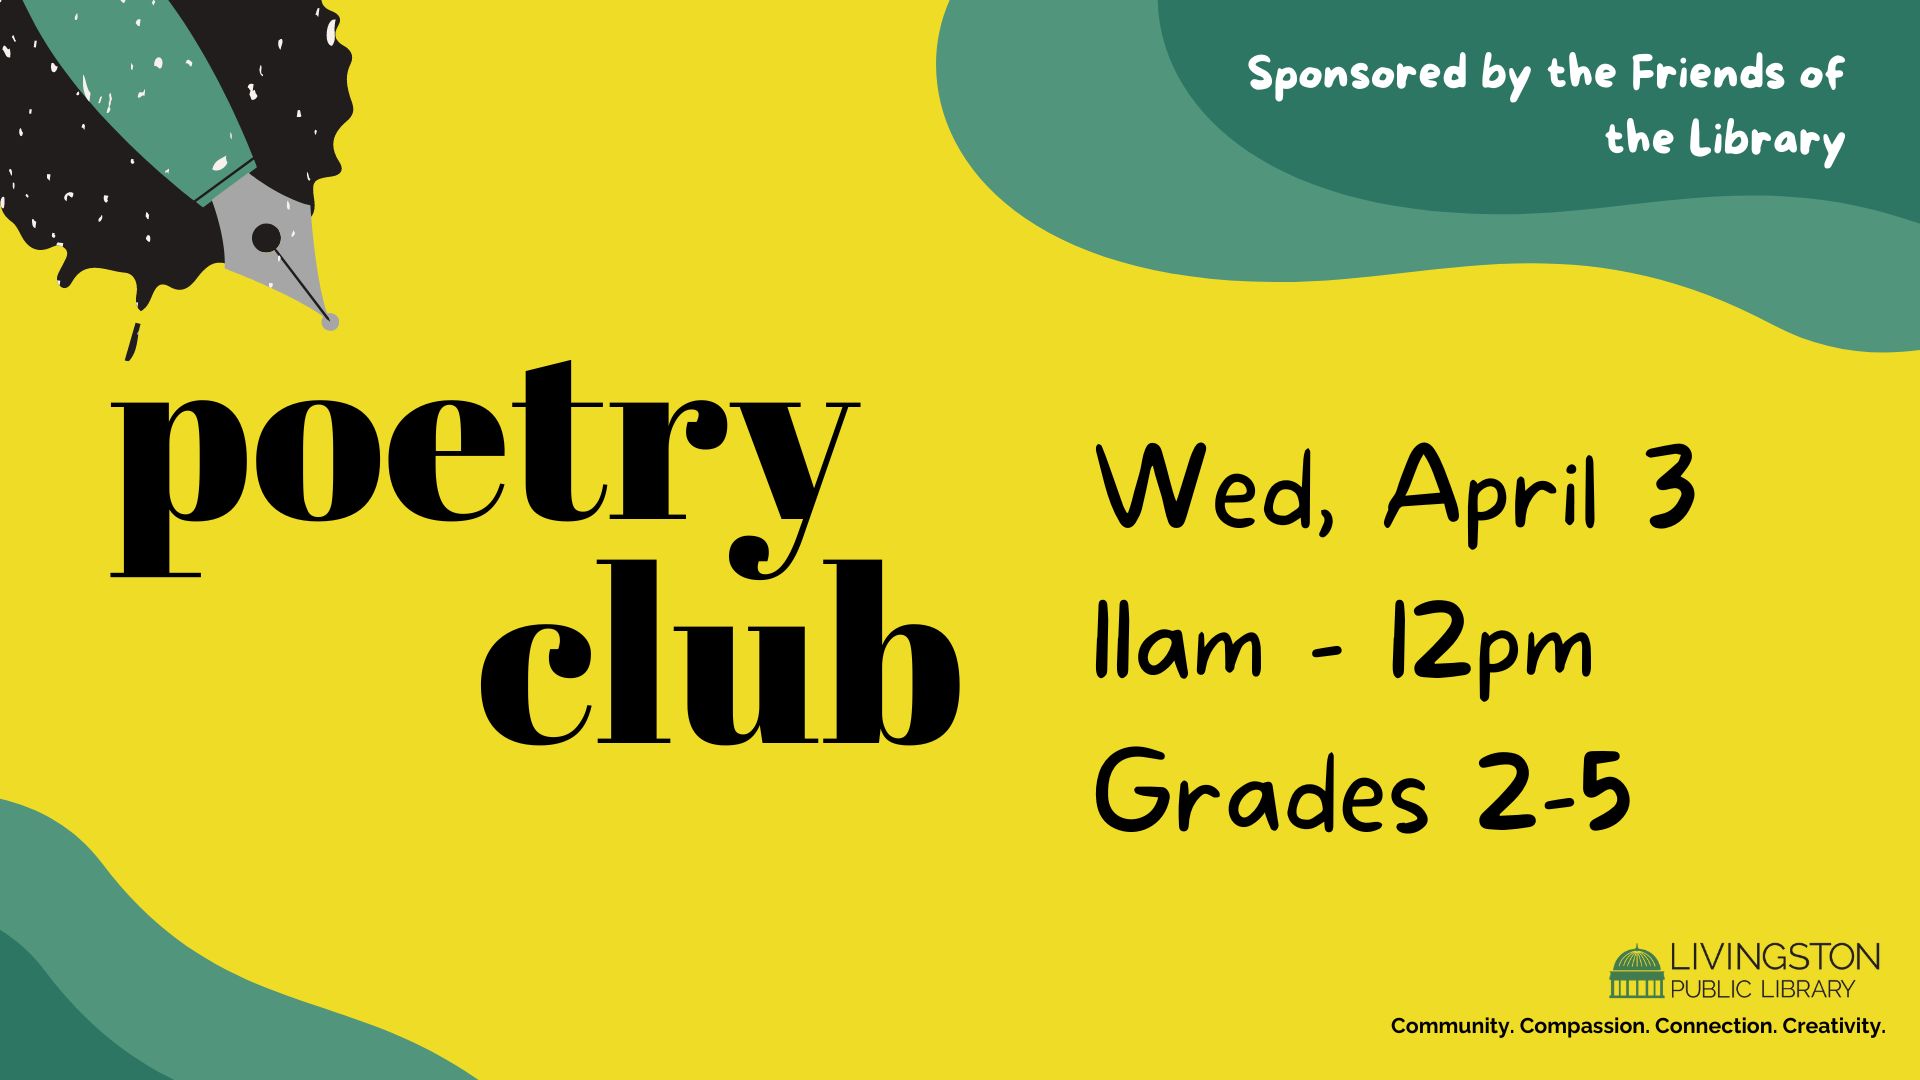 Image of ink pen with ink around it. Poetry club. Wed, April 3, 11am - 12pm, Grades 2-5. Sponsored by the Friends of the Library. Livingston Library logo. Tagline: Community. Compassion. Connection. Creativity.